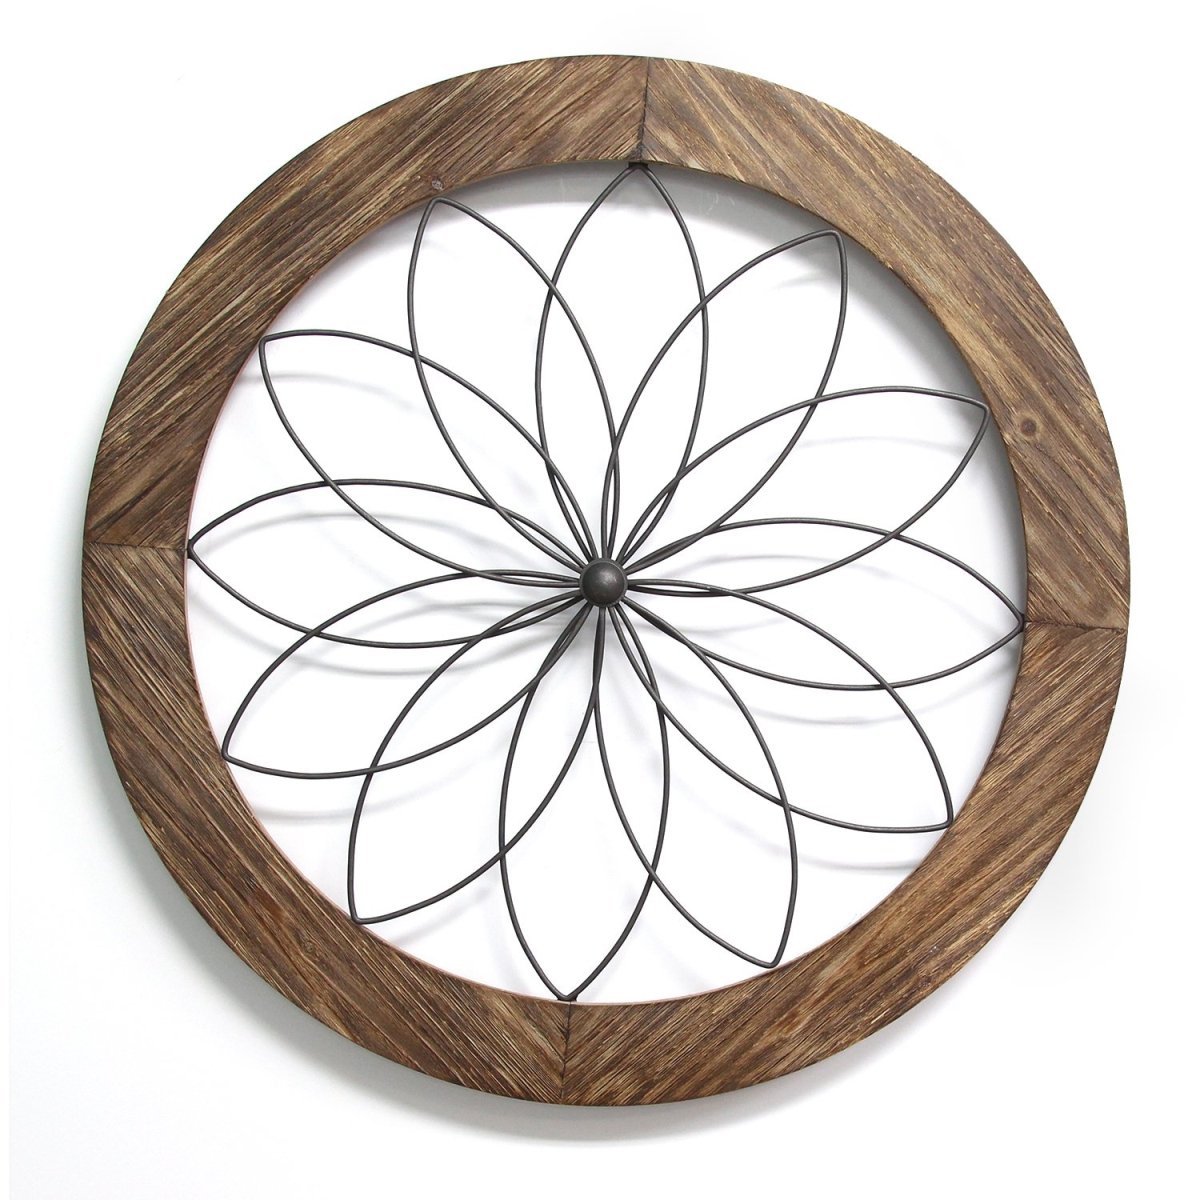 Home Roots 321244 Round Wood & Metal Medallion Wall Decor, Natural Wood & Black